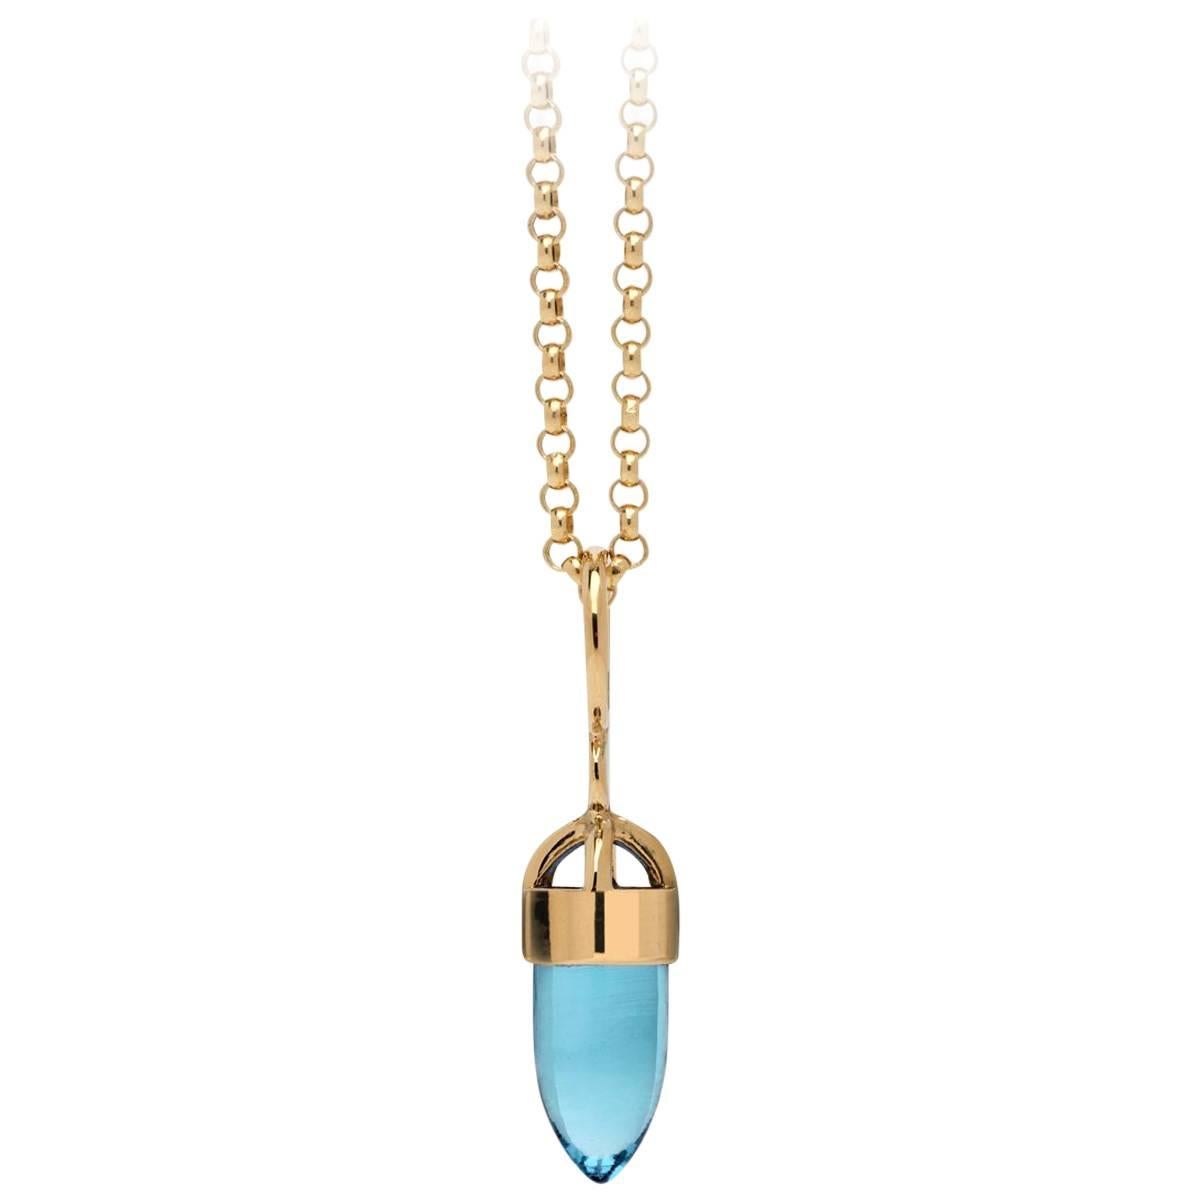 As seen in FT - How to Spend it!

Mallorca Ring Dome
18kt yellow gold pendant,
8x15mm cabochon stone
These beautifully styled pendants offer a more classical look, great for everyday, whatever the occasion. Measuring approximately 35mm in length and